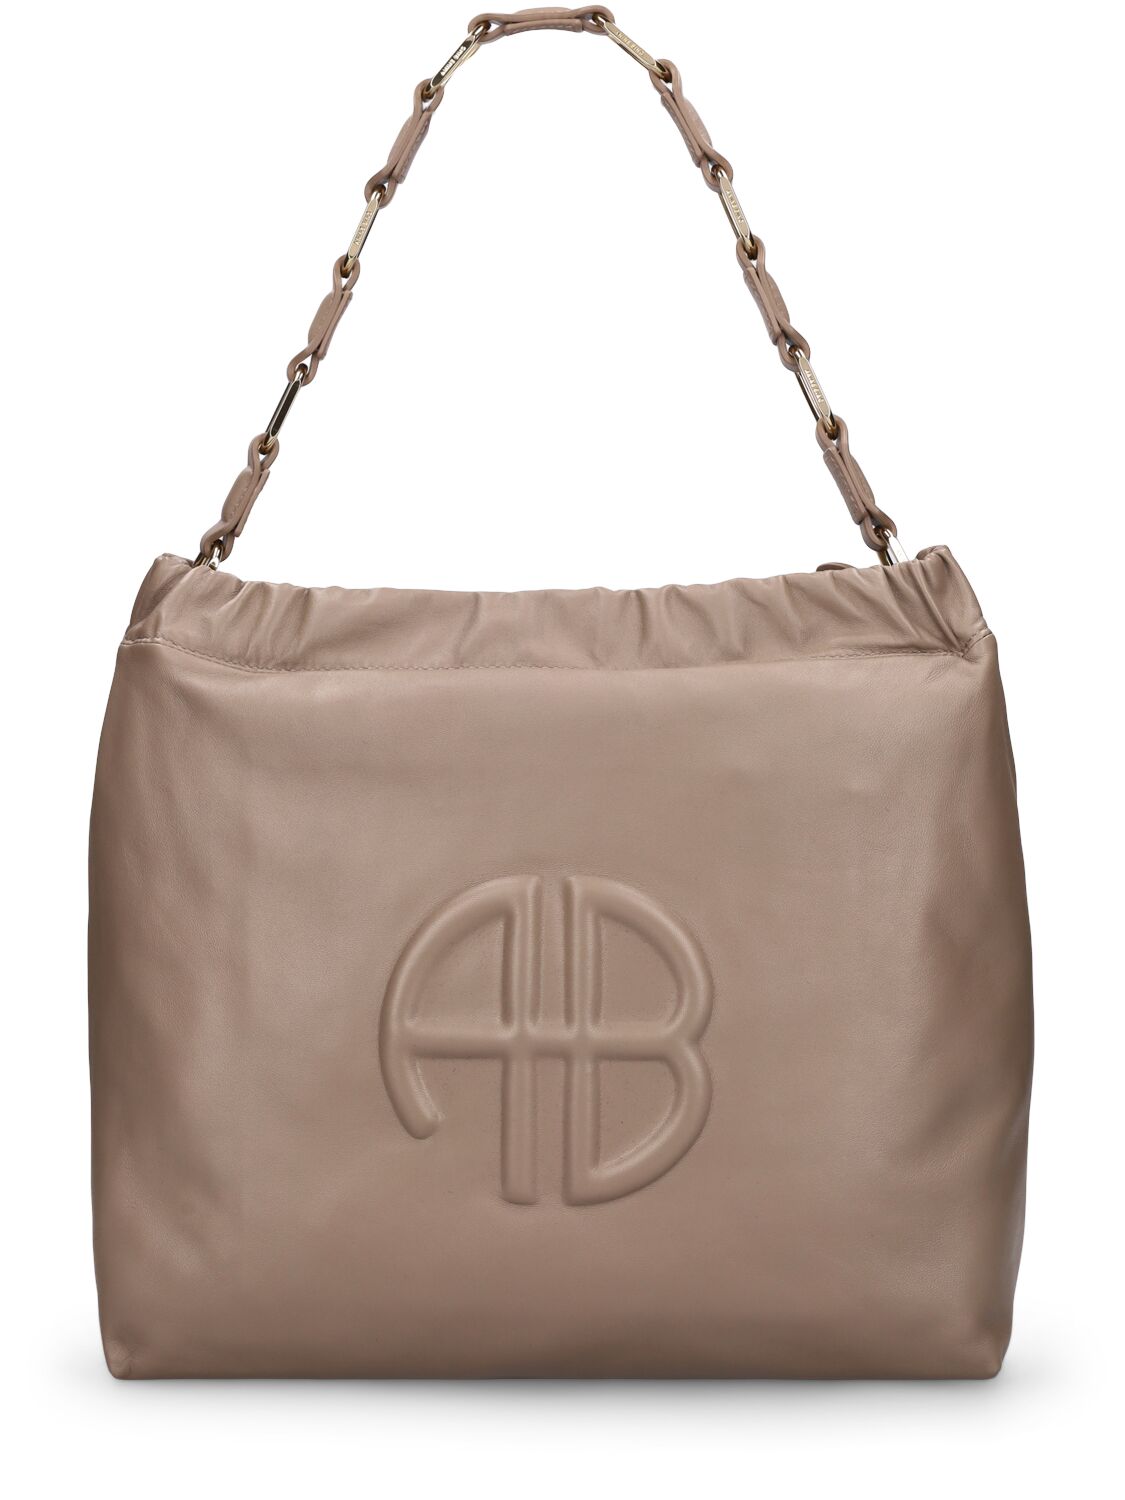 Anine Bing Kate Leather Shoulder Bag In Taupe